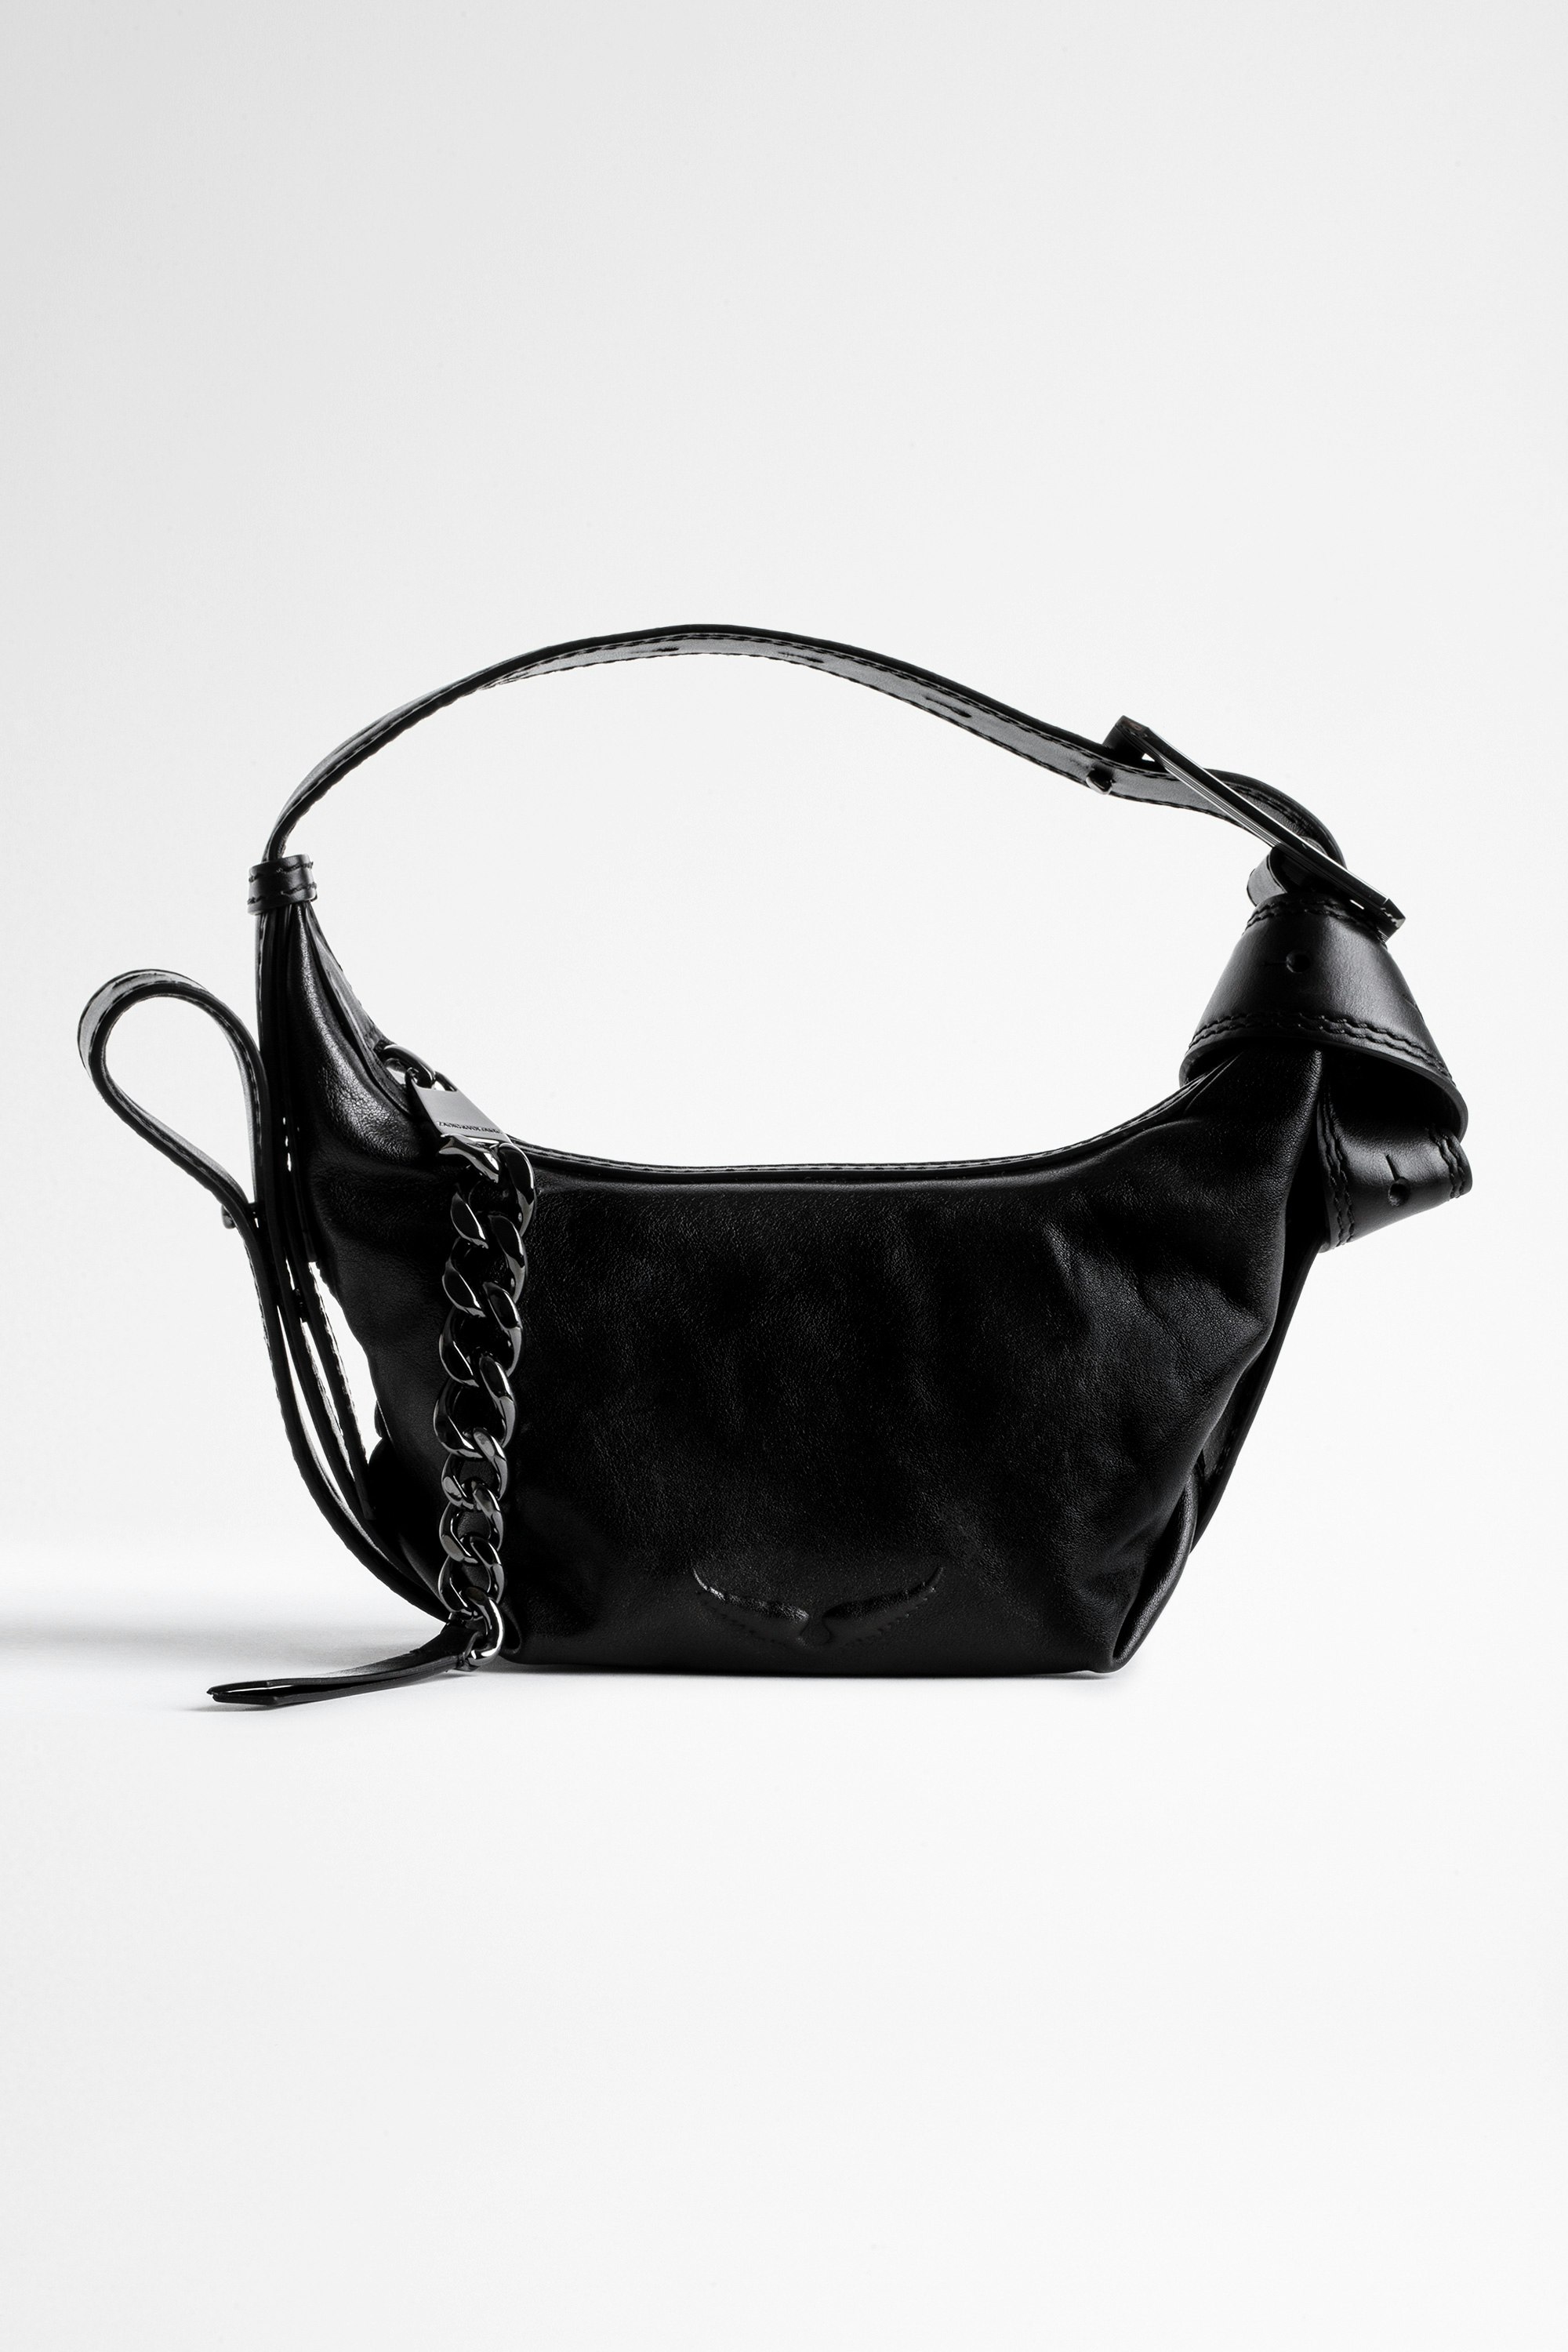 Le Cecilia XS バッグ Cecilia XS bag in black vegetable dyeing leather